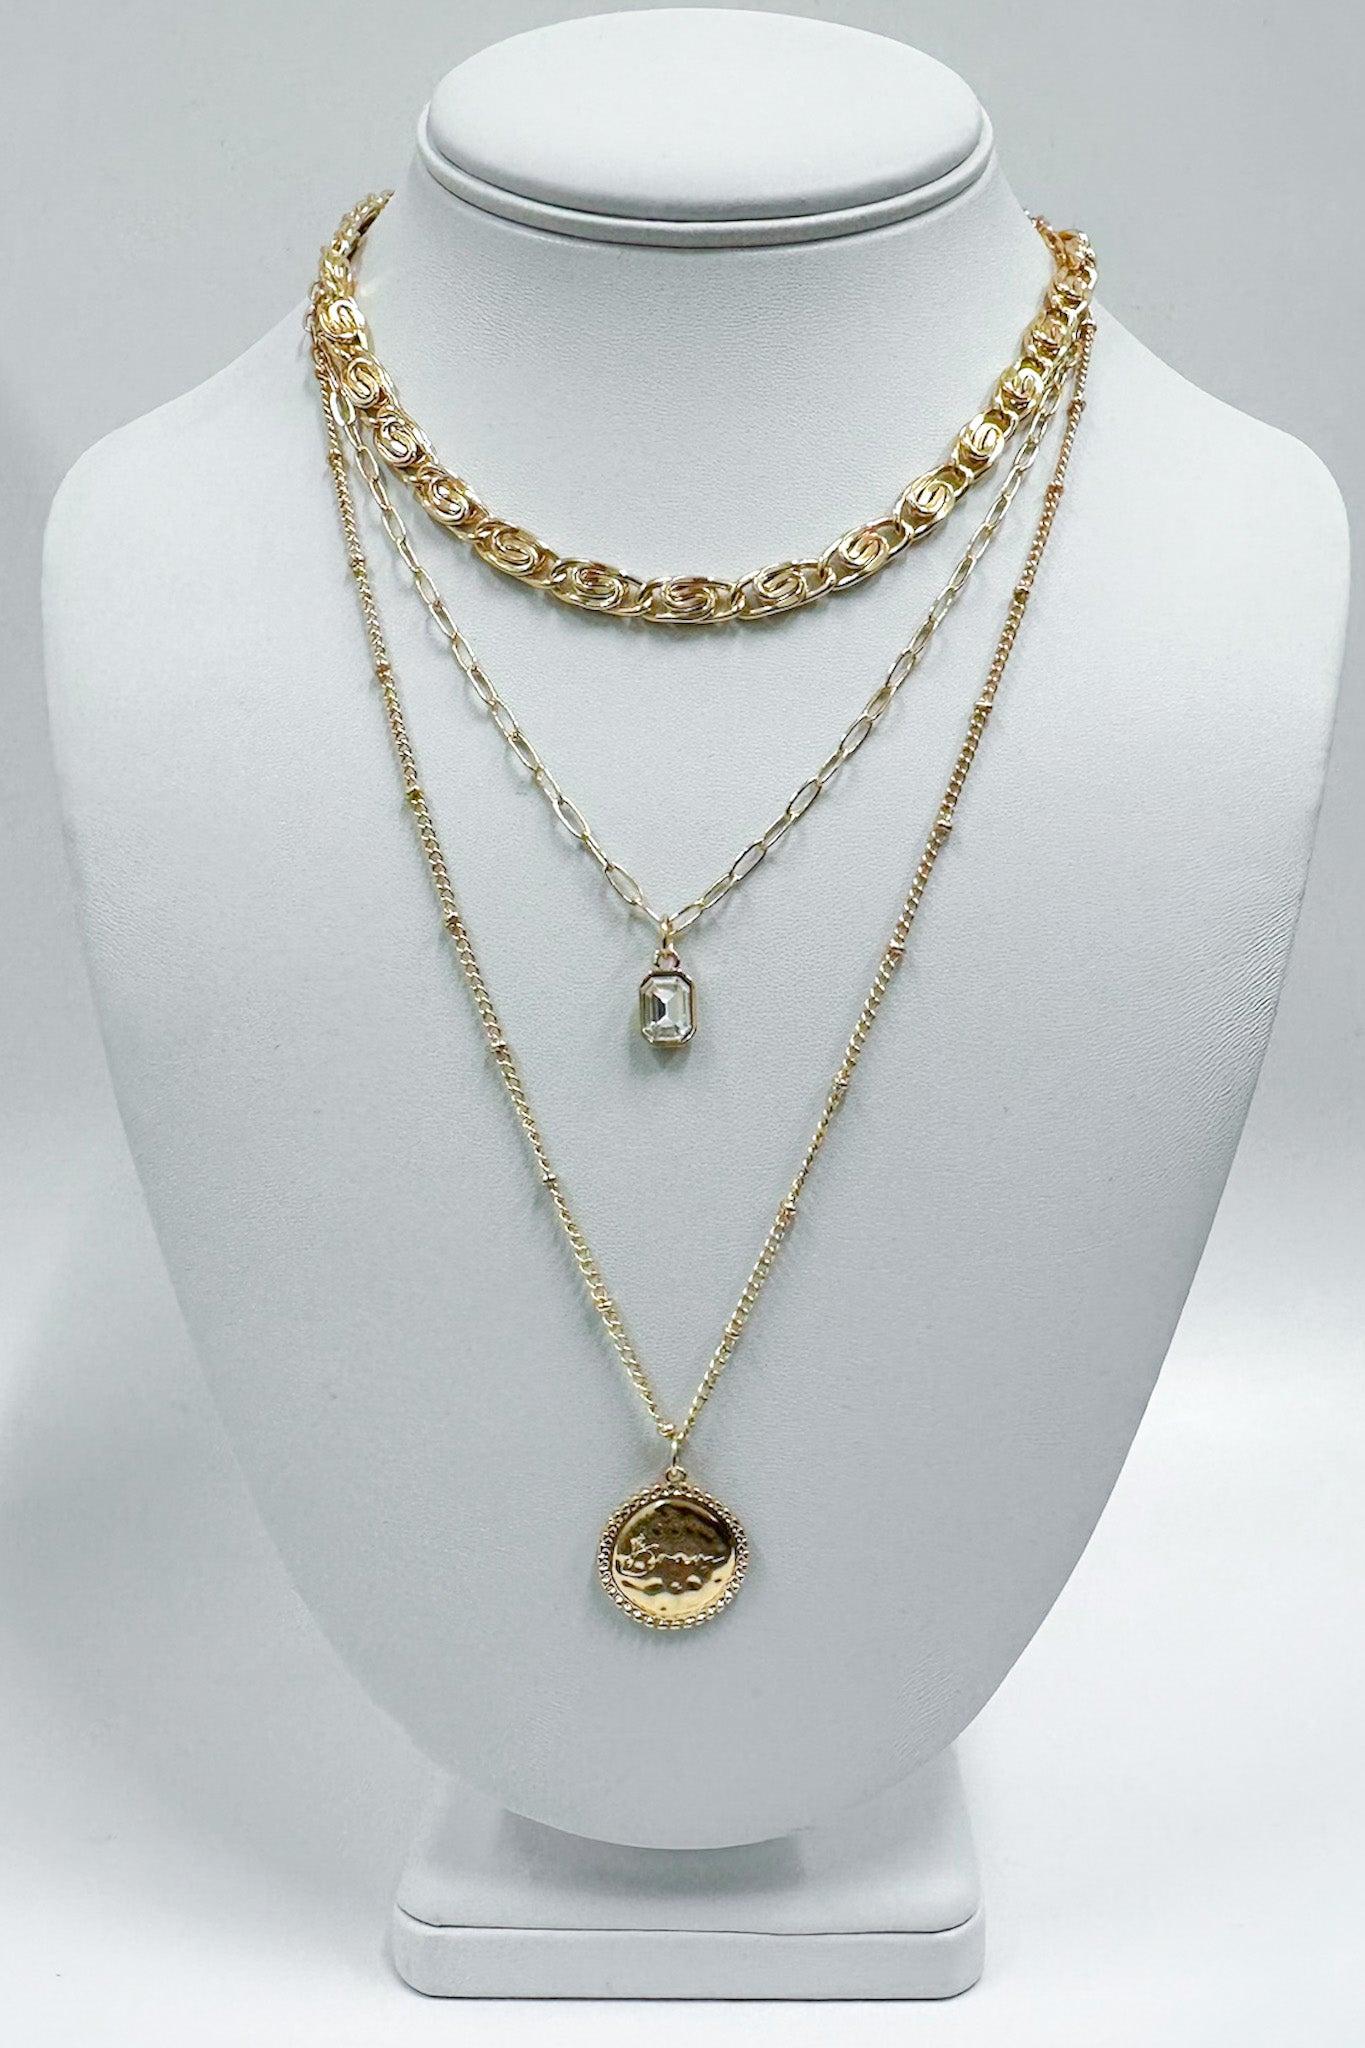  Vivacious Persona Chain and Coin Layered Necklace - Madison and Mallory